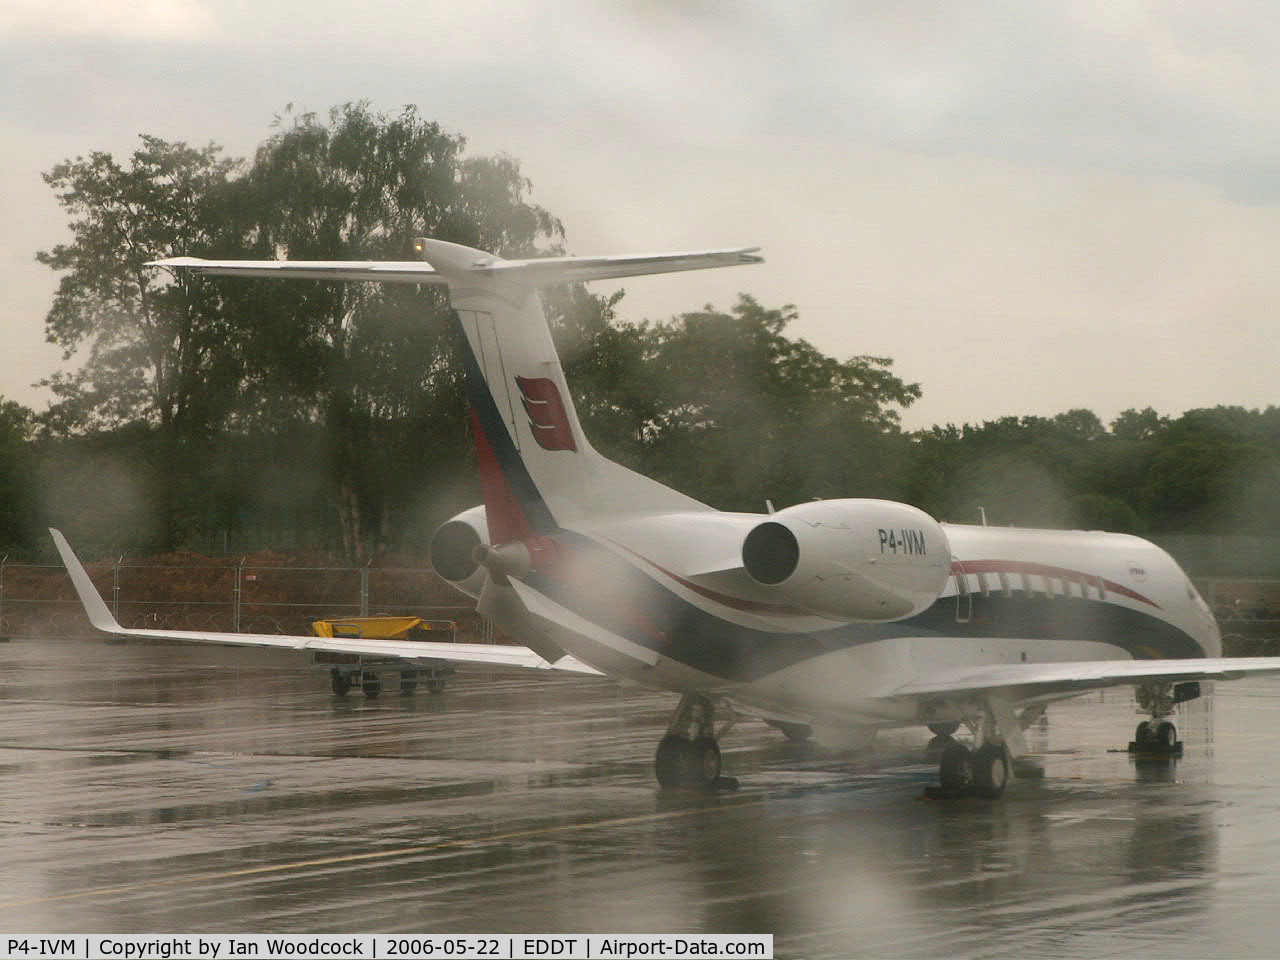 P4-IVM, 2008 Embraer EMB-135BJ Legacy 600 C/N 14501031, Embraer ERJ-135 BJ/Taken through the aircraft window on a very wet day at Berlin-Tegel